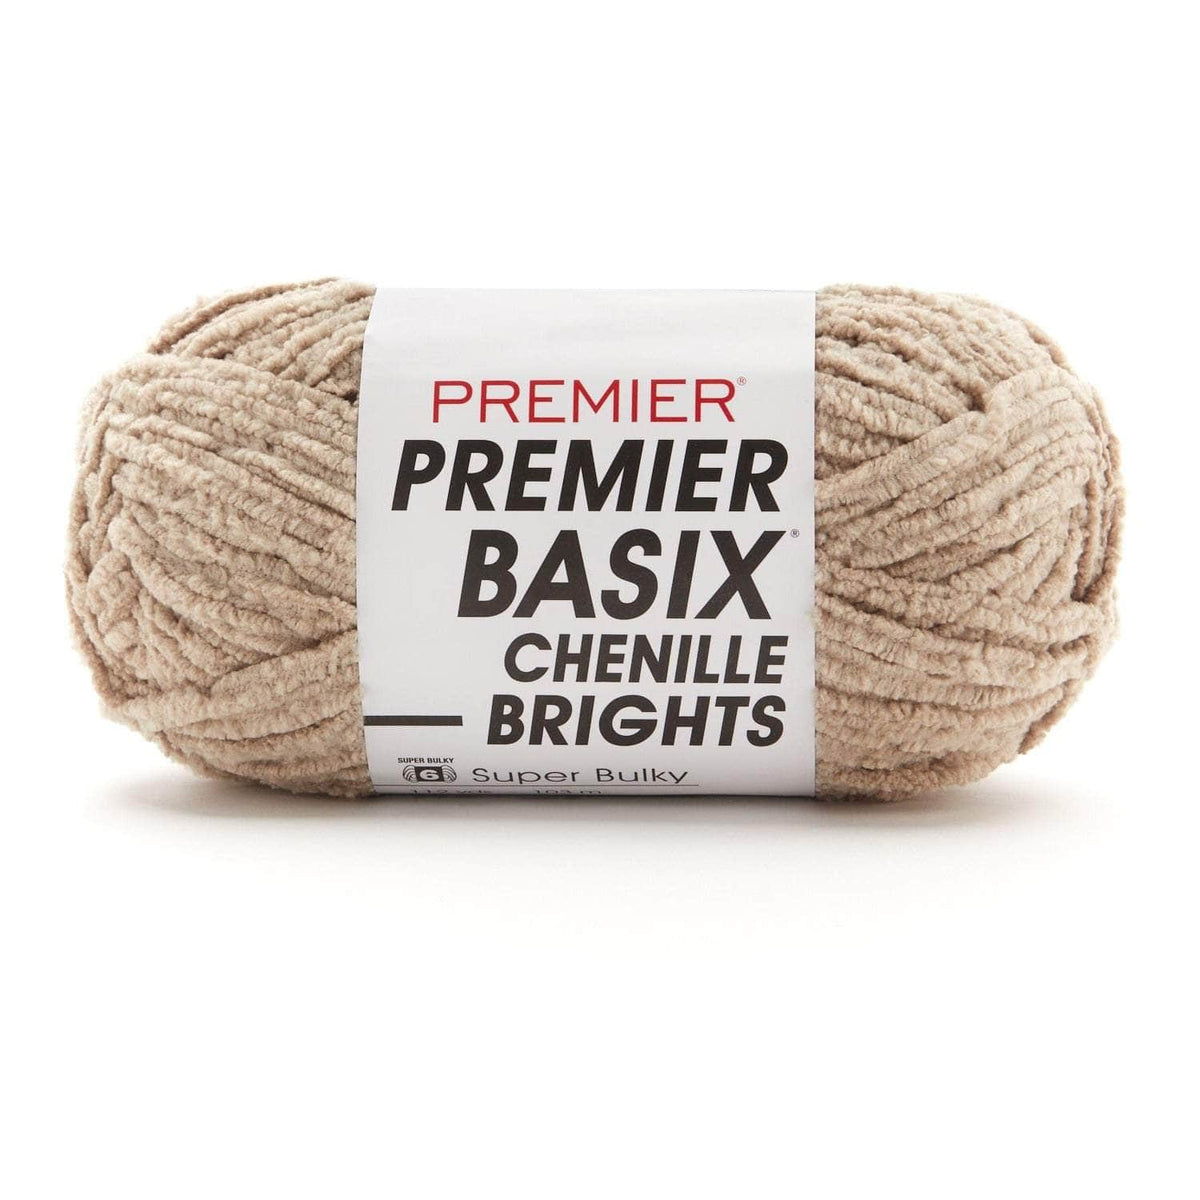  Premier Yarns Basix Chenille Brights Yarn - 5.3 Oz - #6 Super  Bulky Weight - 3 Pack Bundle with Bella's Crafts Stitch Markers (Black)